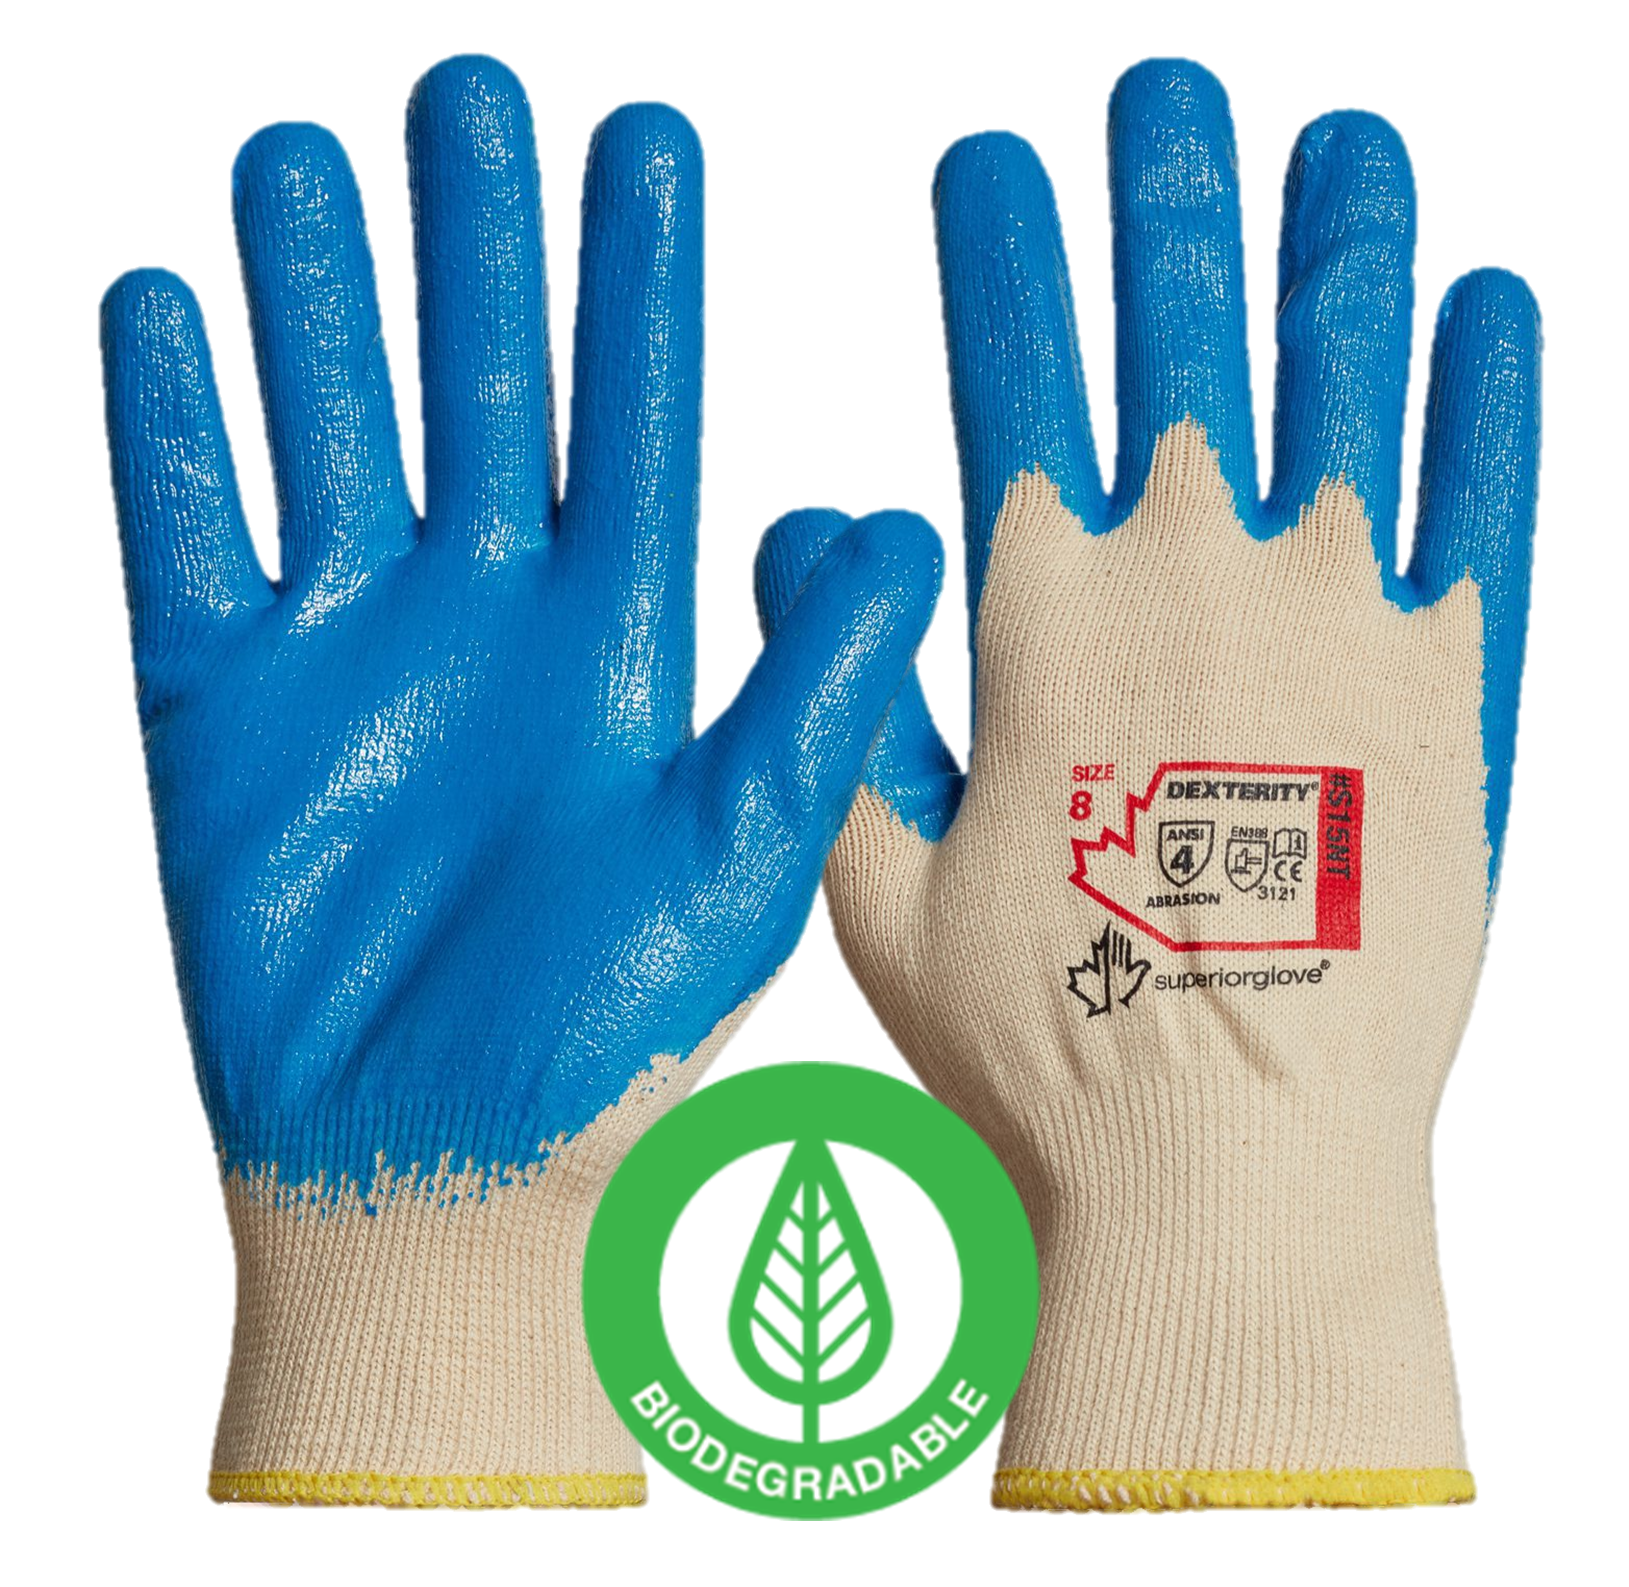 Dexterity® S15NT Blue Nitrile Coated Sustainable Work Gloves with biodegradable badge